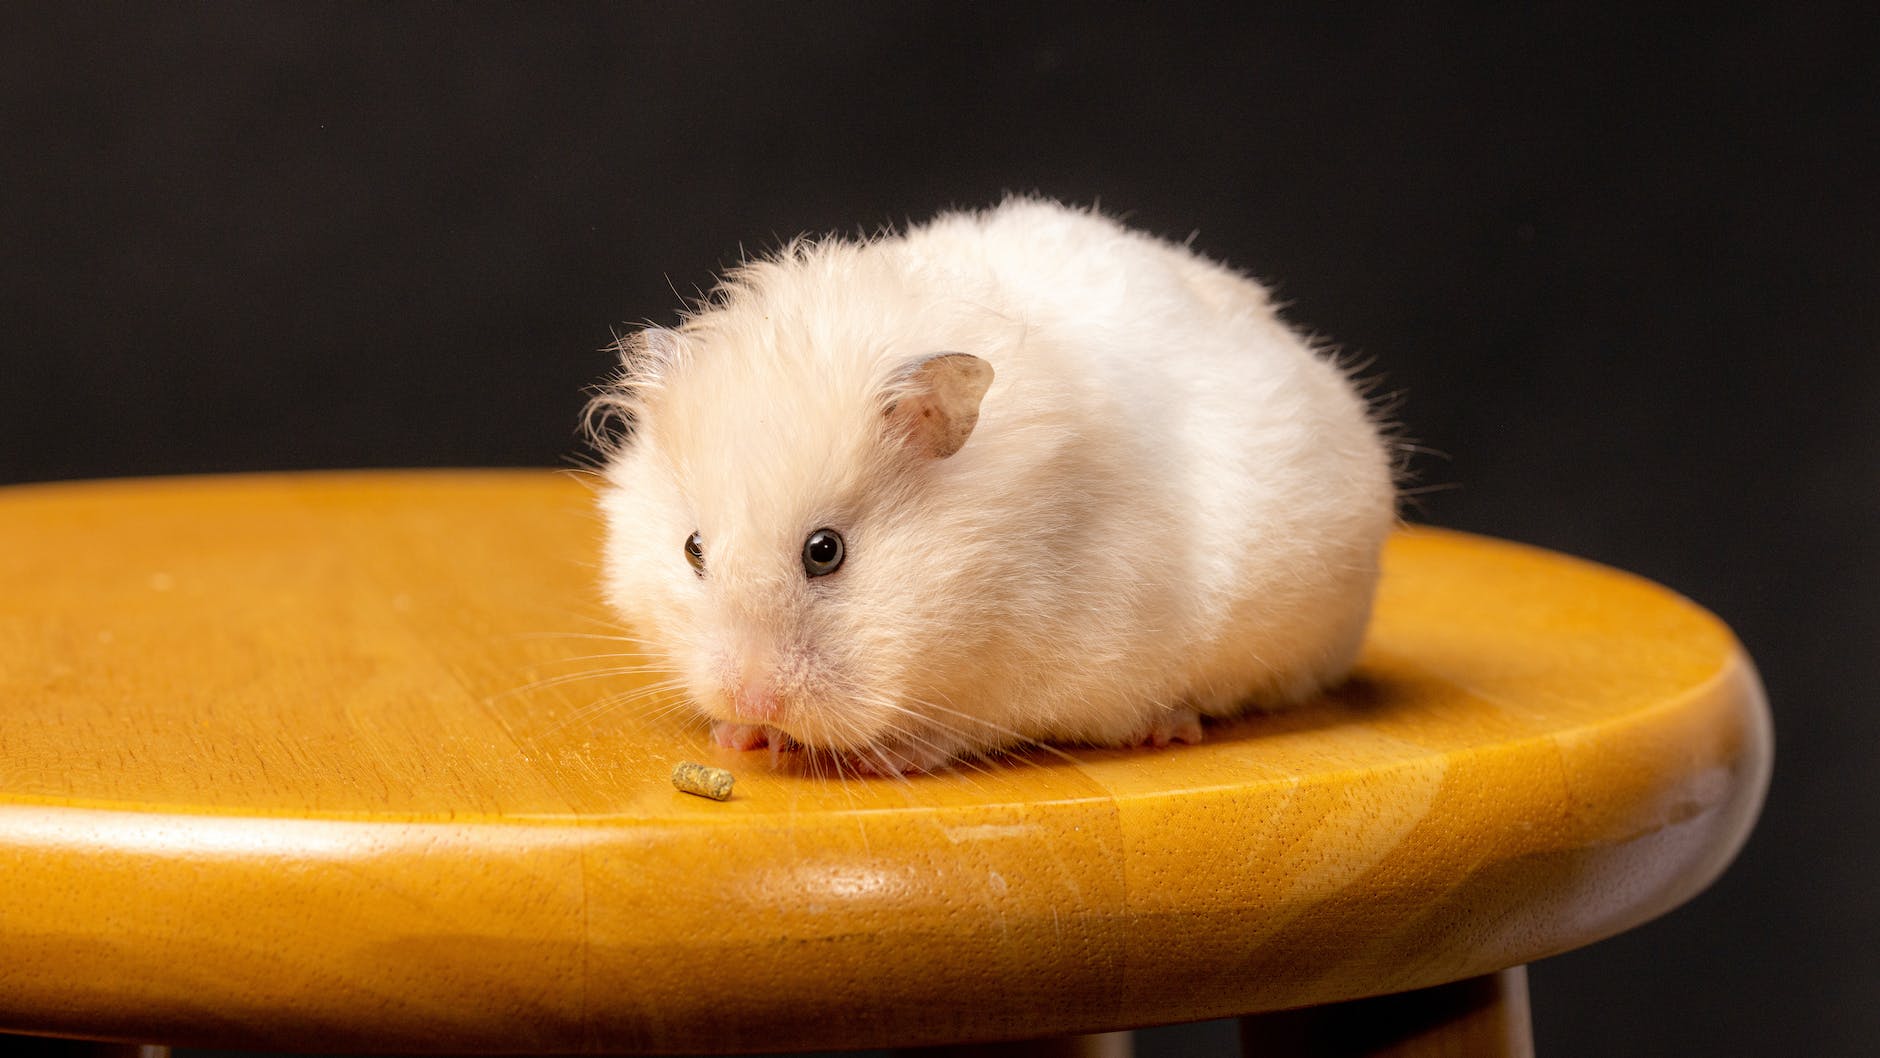 a close up shot of a hamster on a bar stool